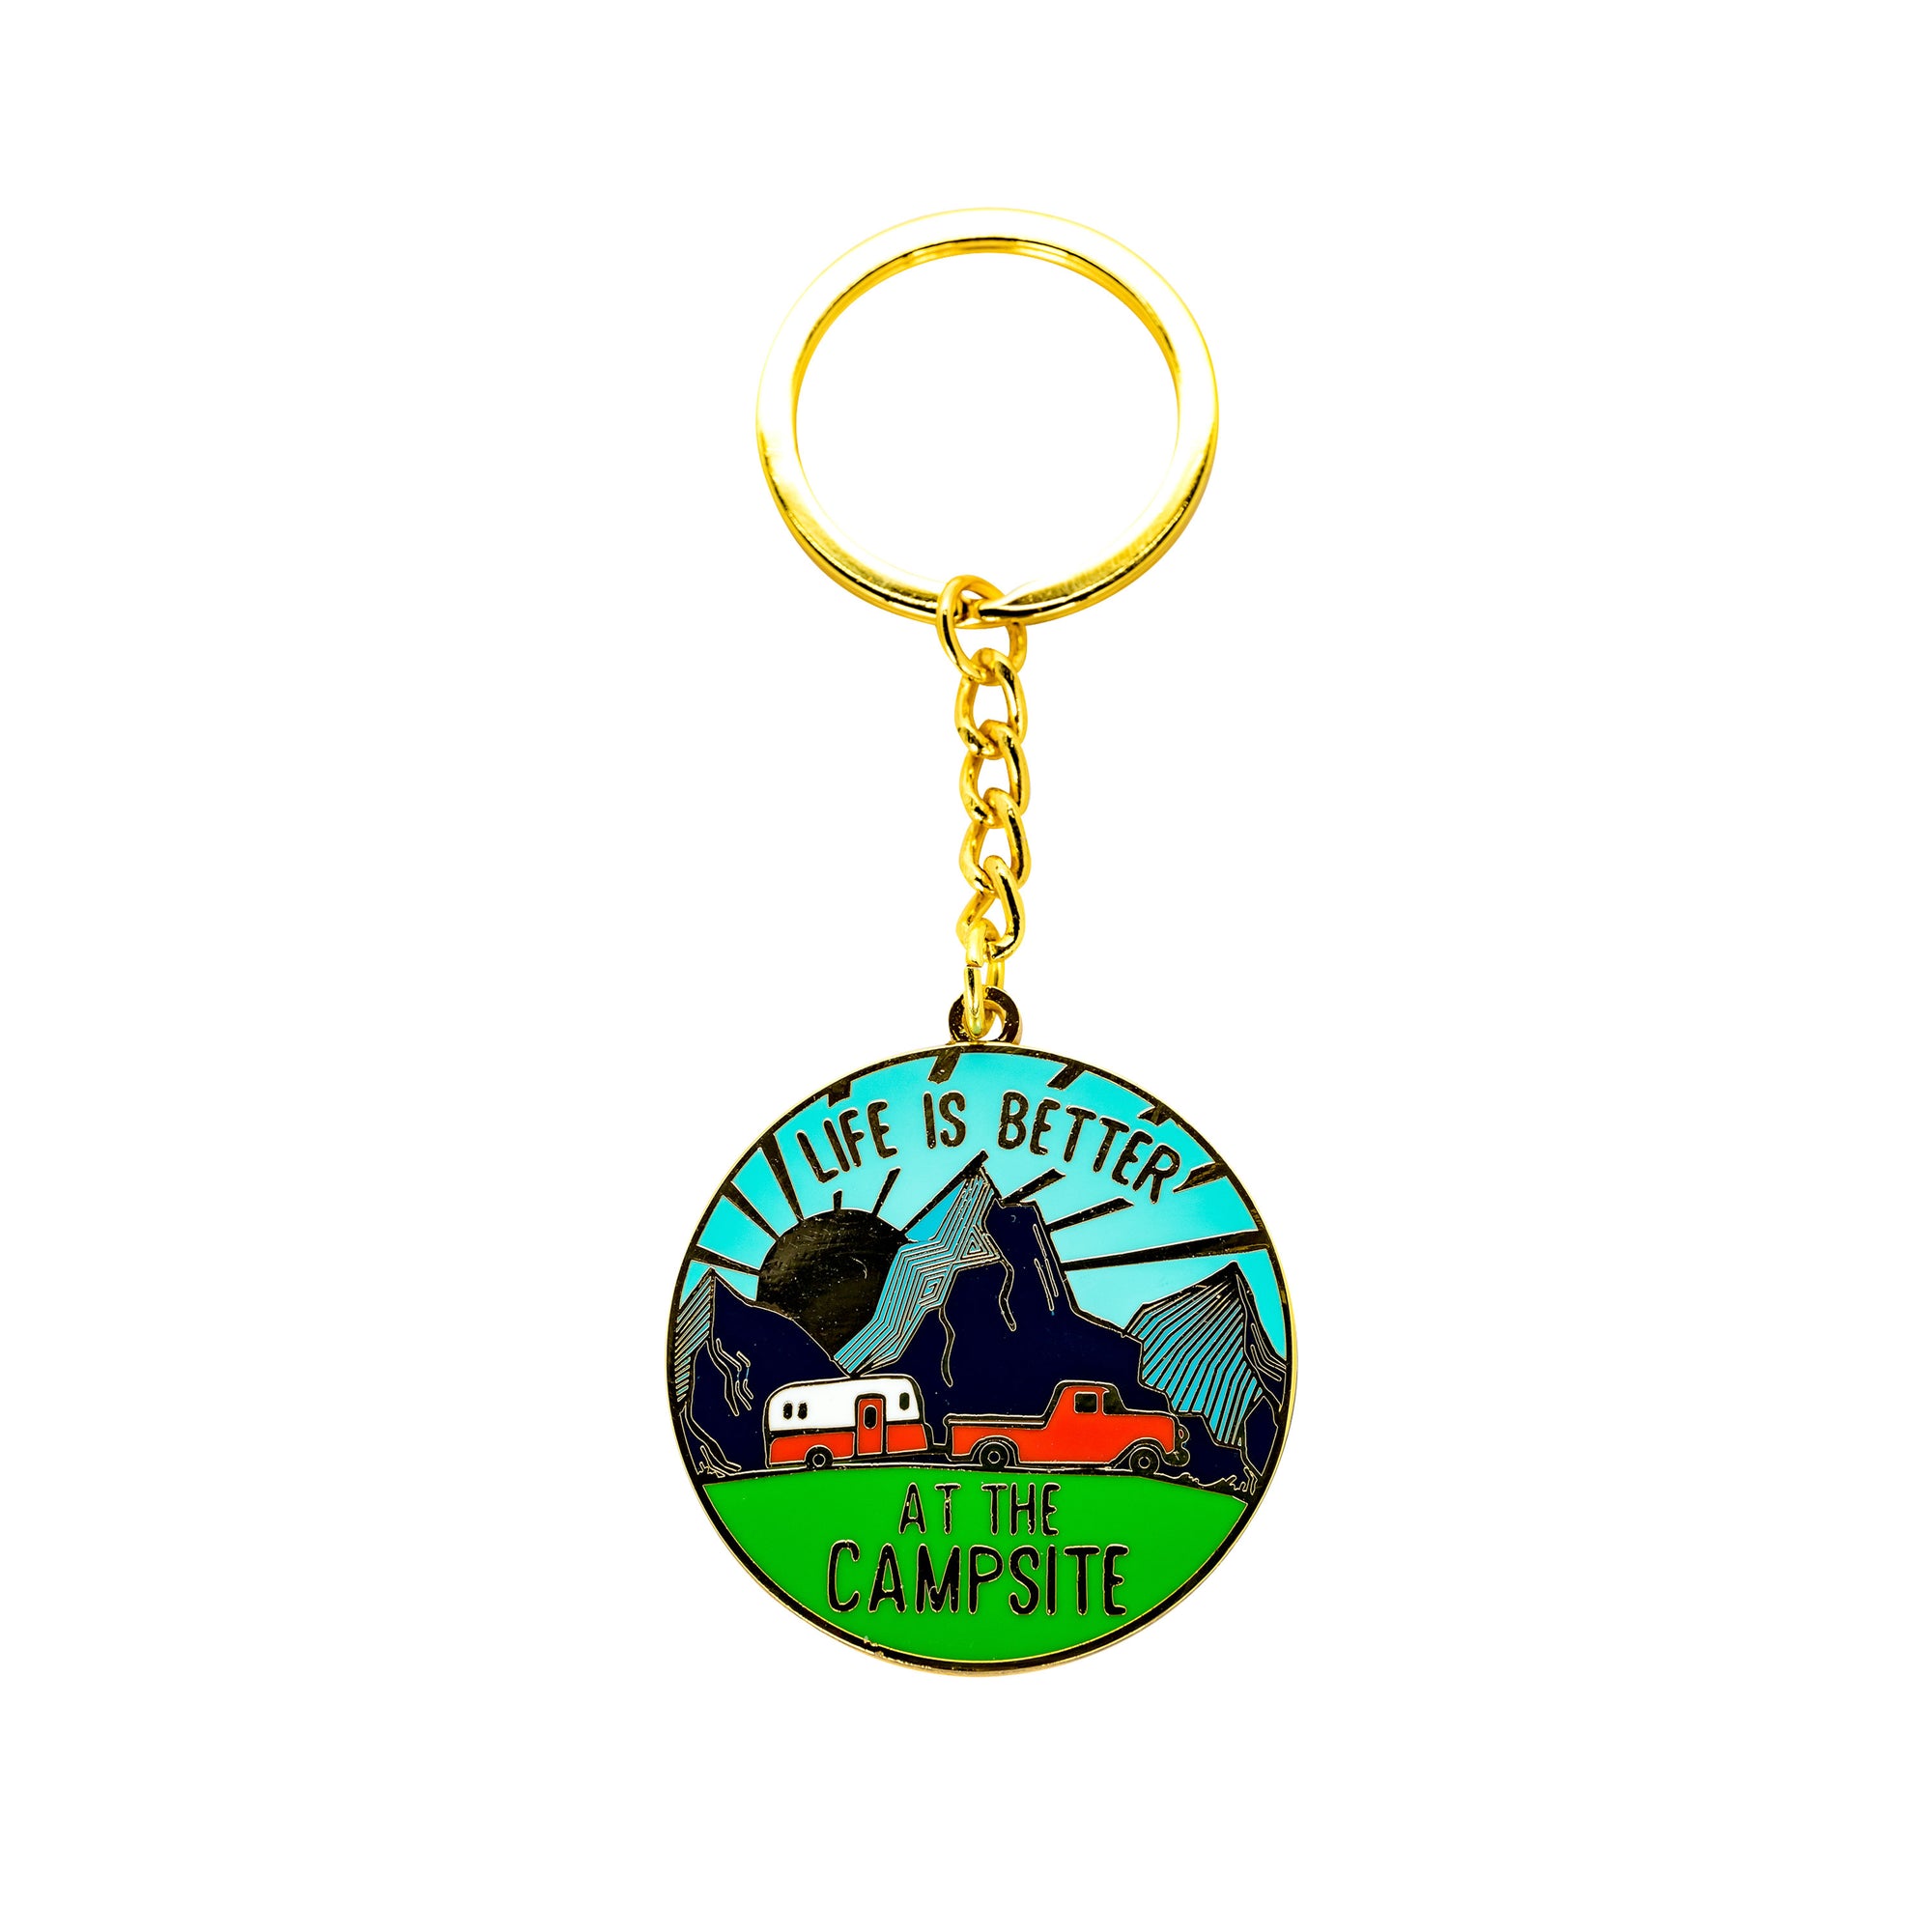 Camco 53289 "Life is Better at the Campsite" Keychain - Sunrise